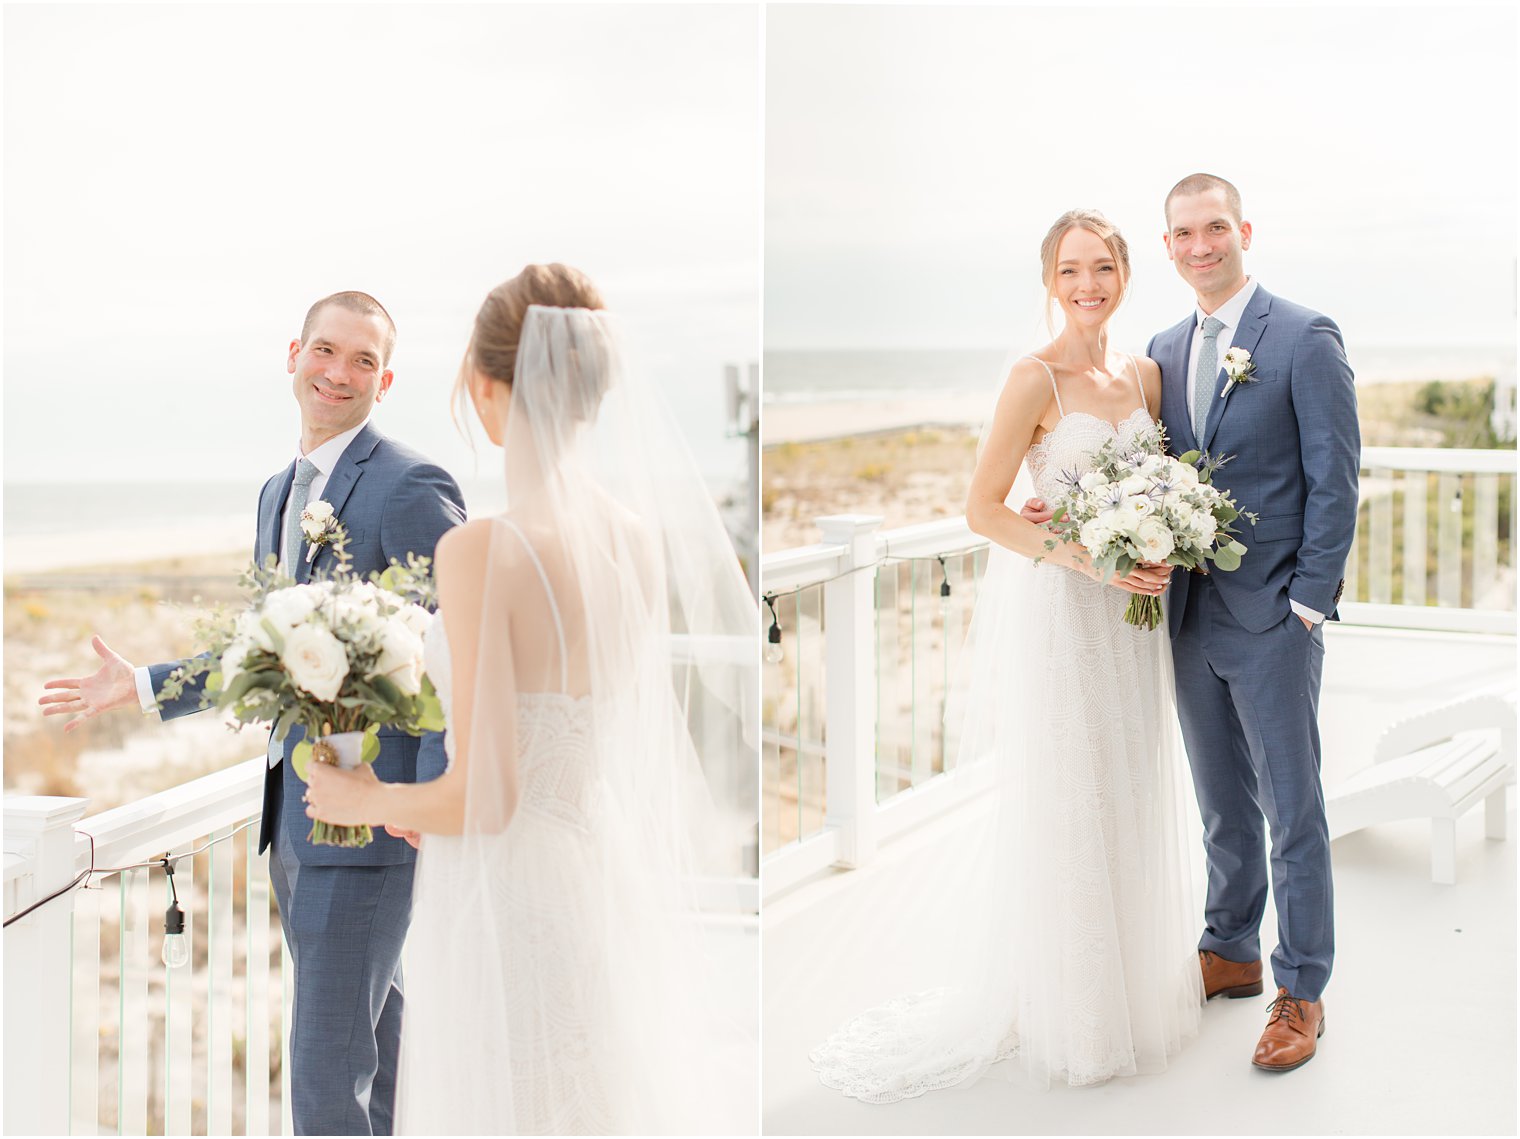 LBI first look on rooftop before wedding